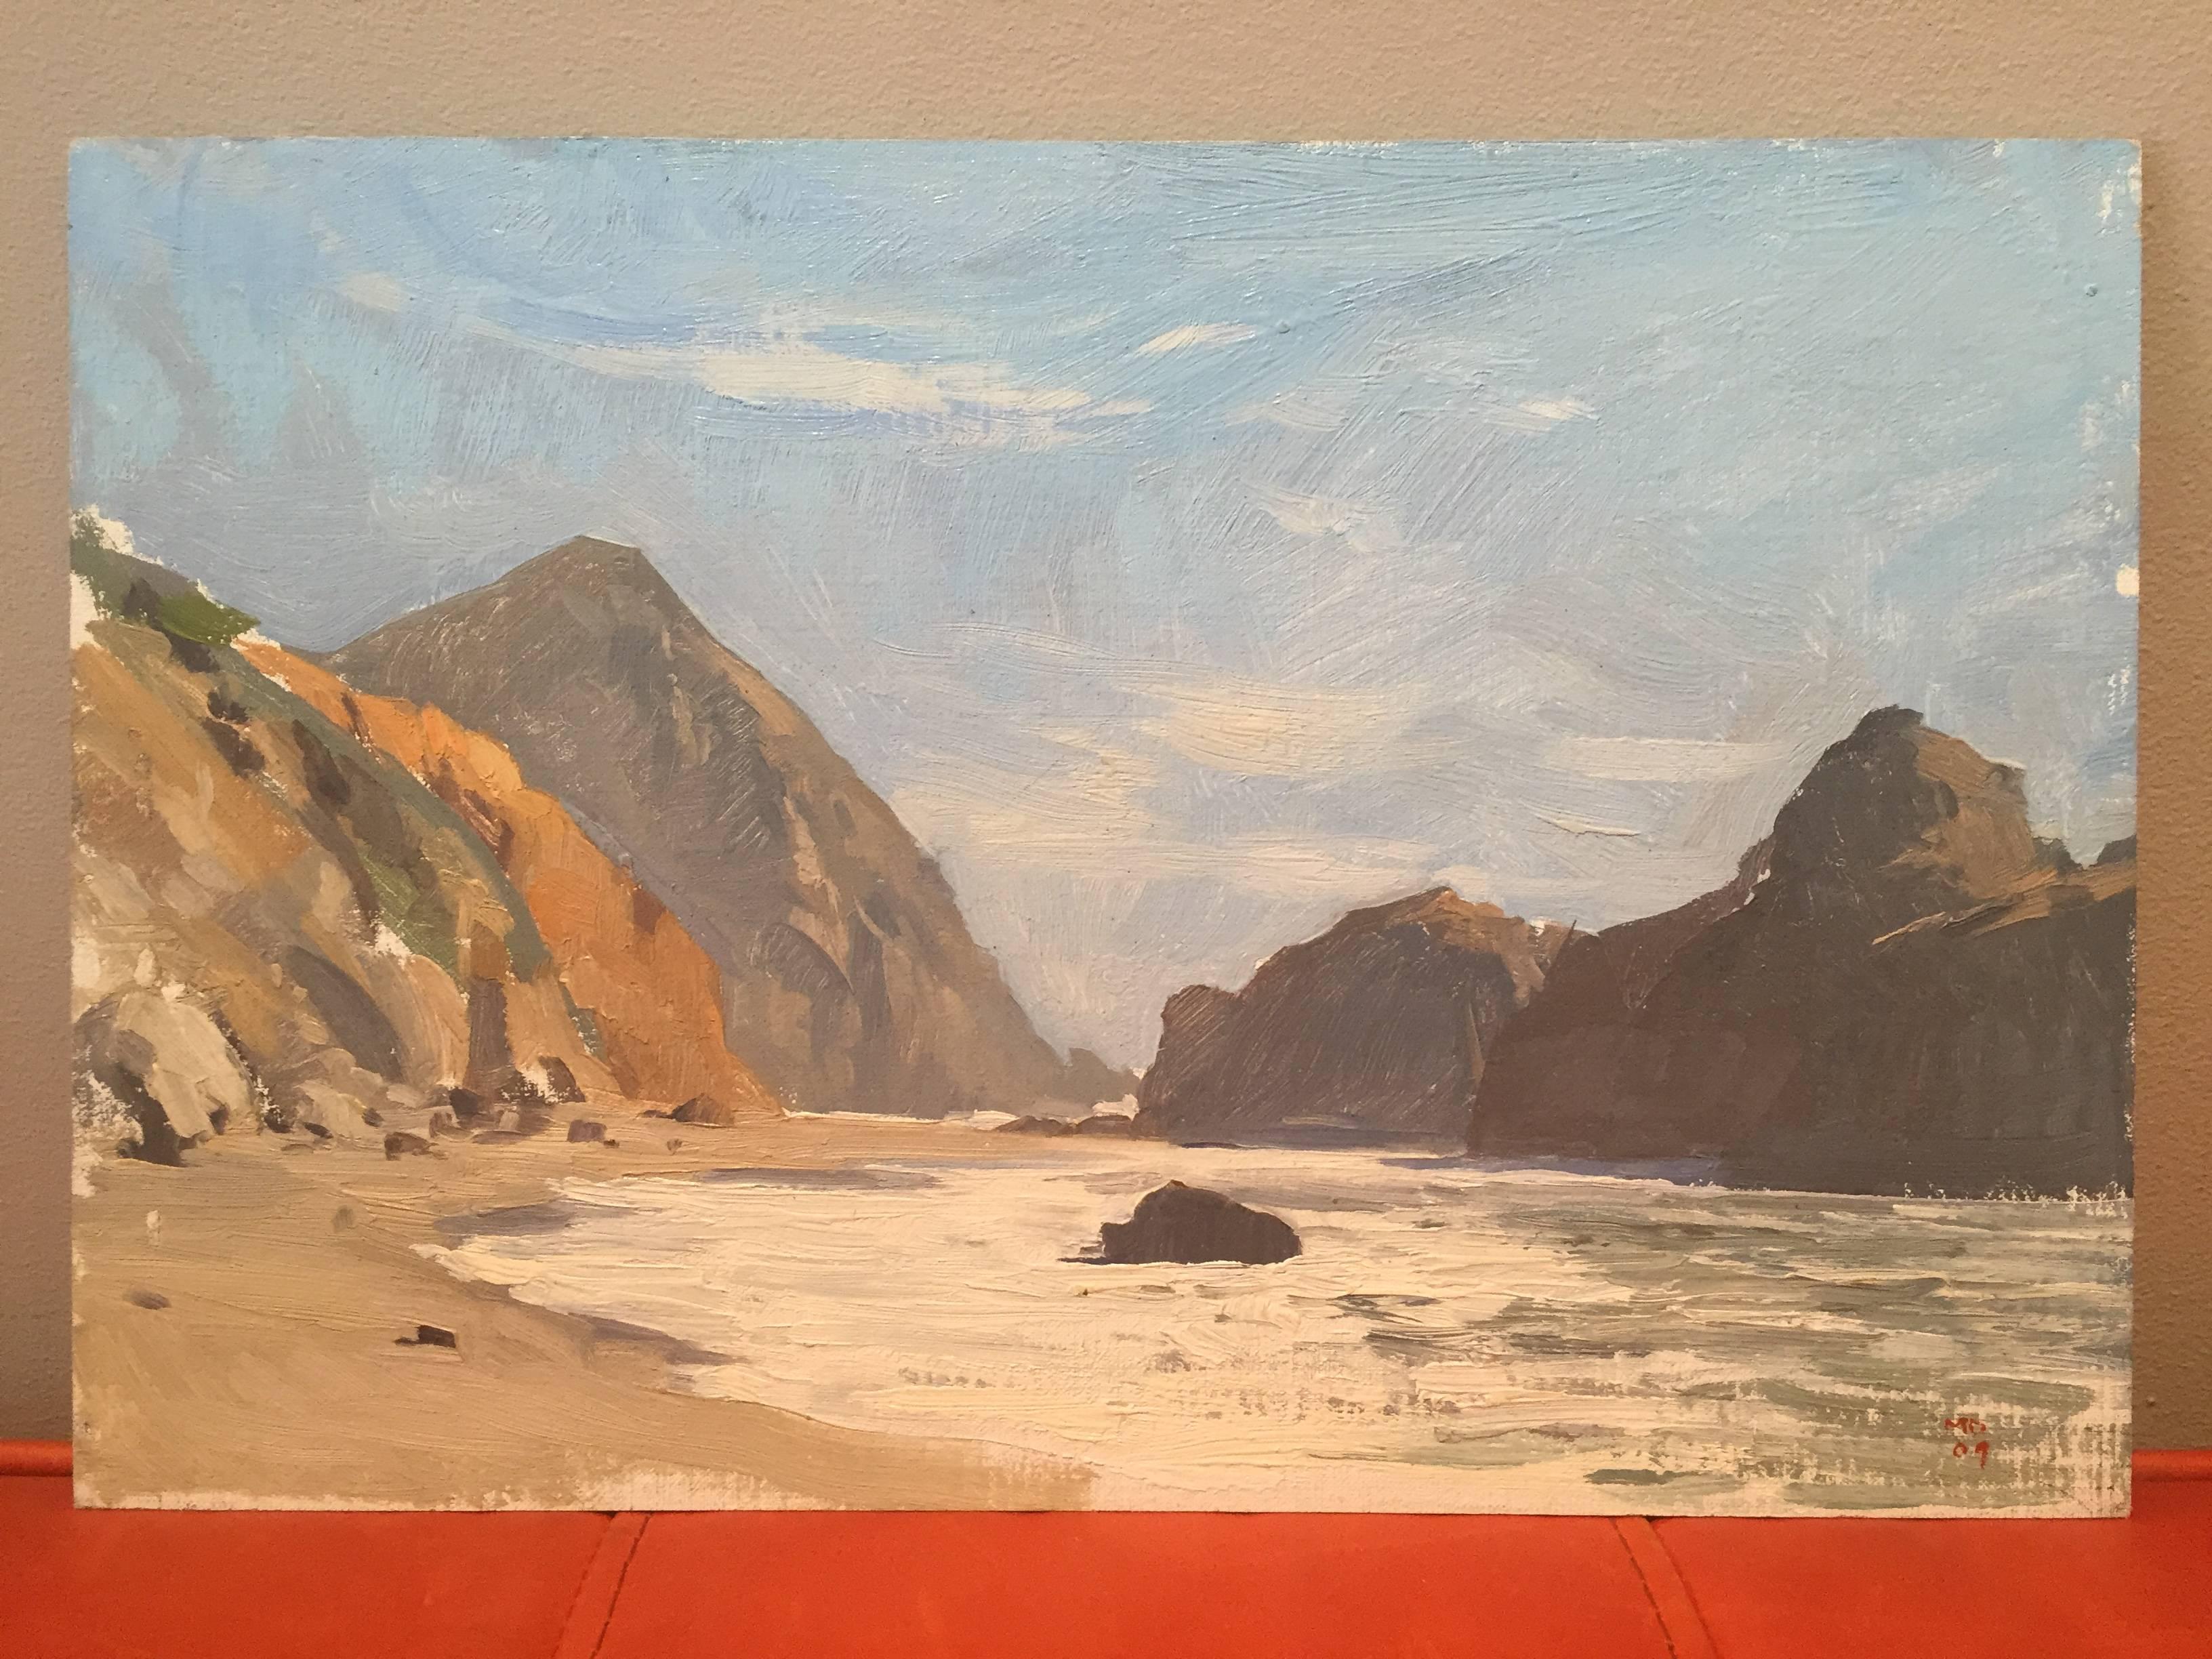 Pfeiffer Beach - Painting by Marc Dalessio